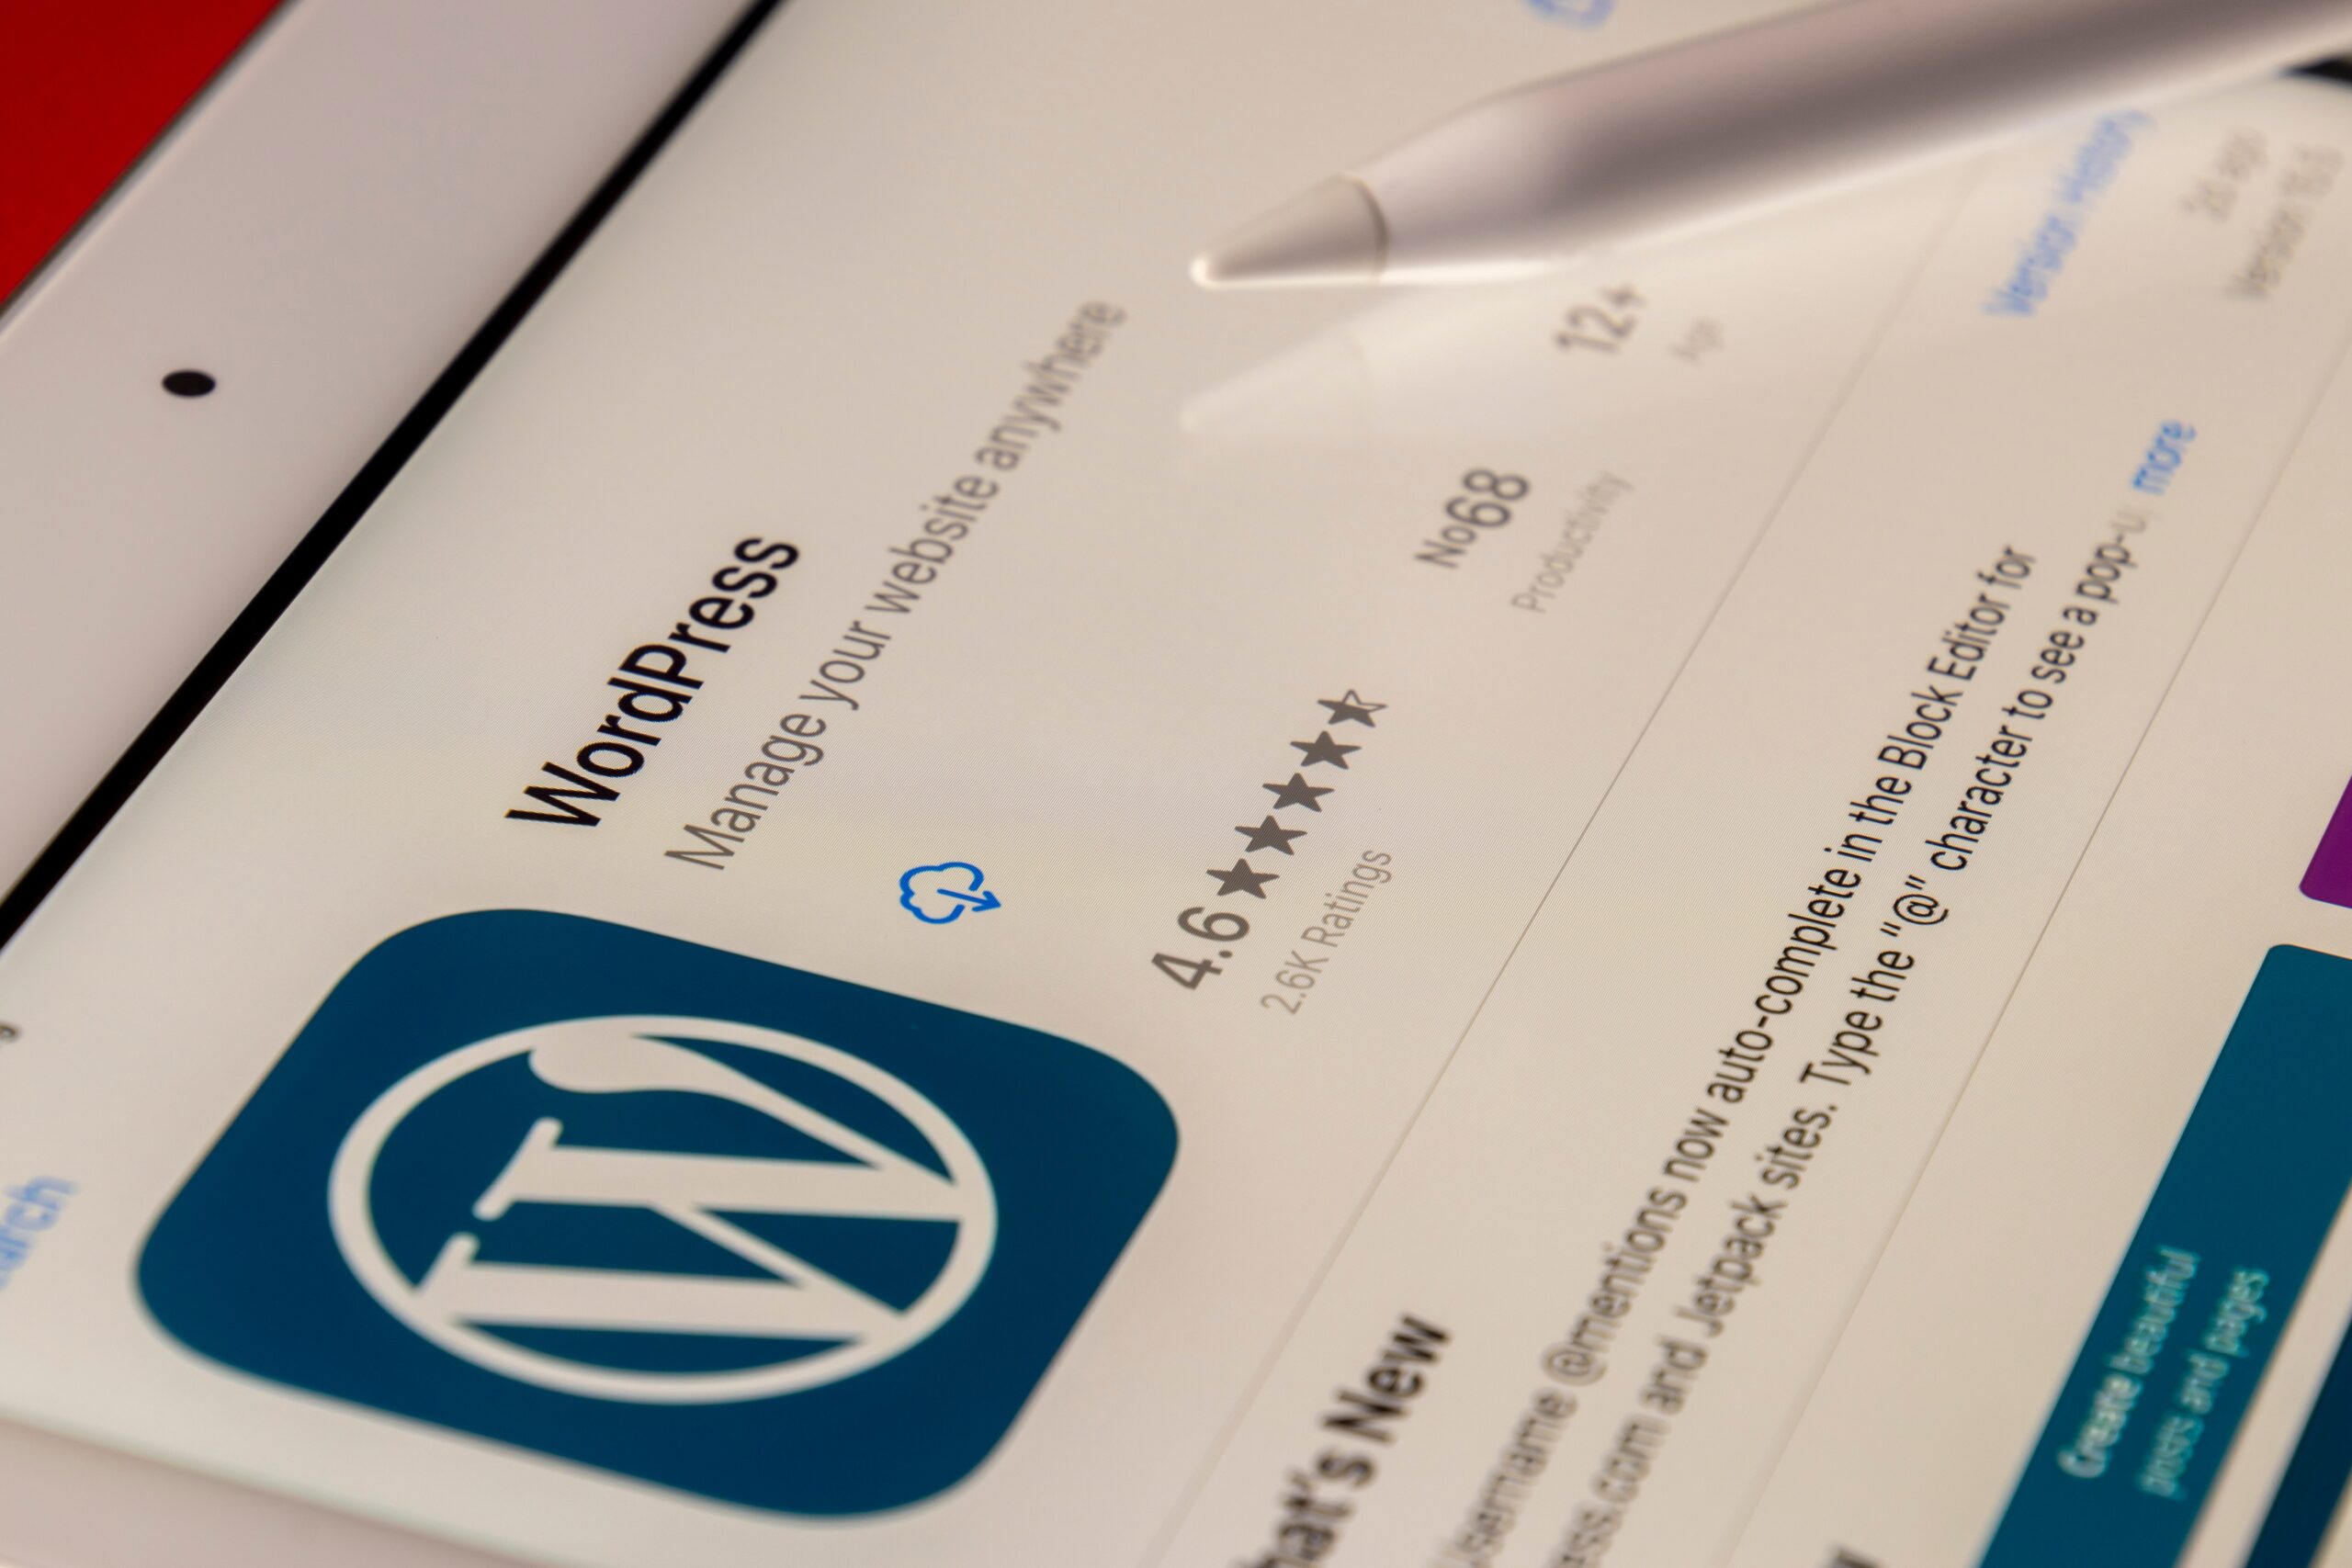 WordPress Has Released a Blog for Web Developers featured image